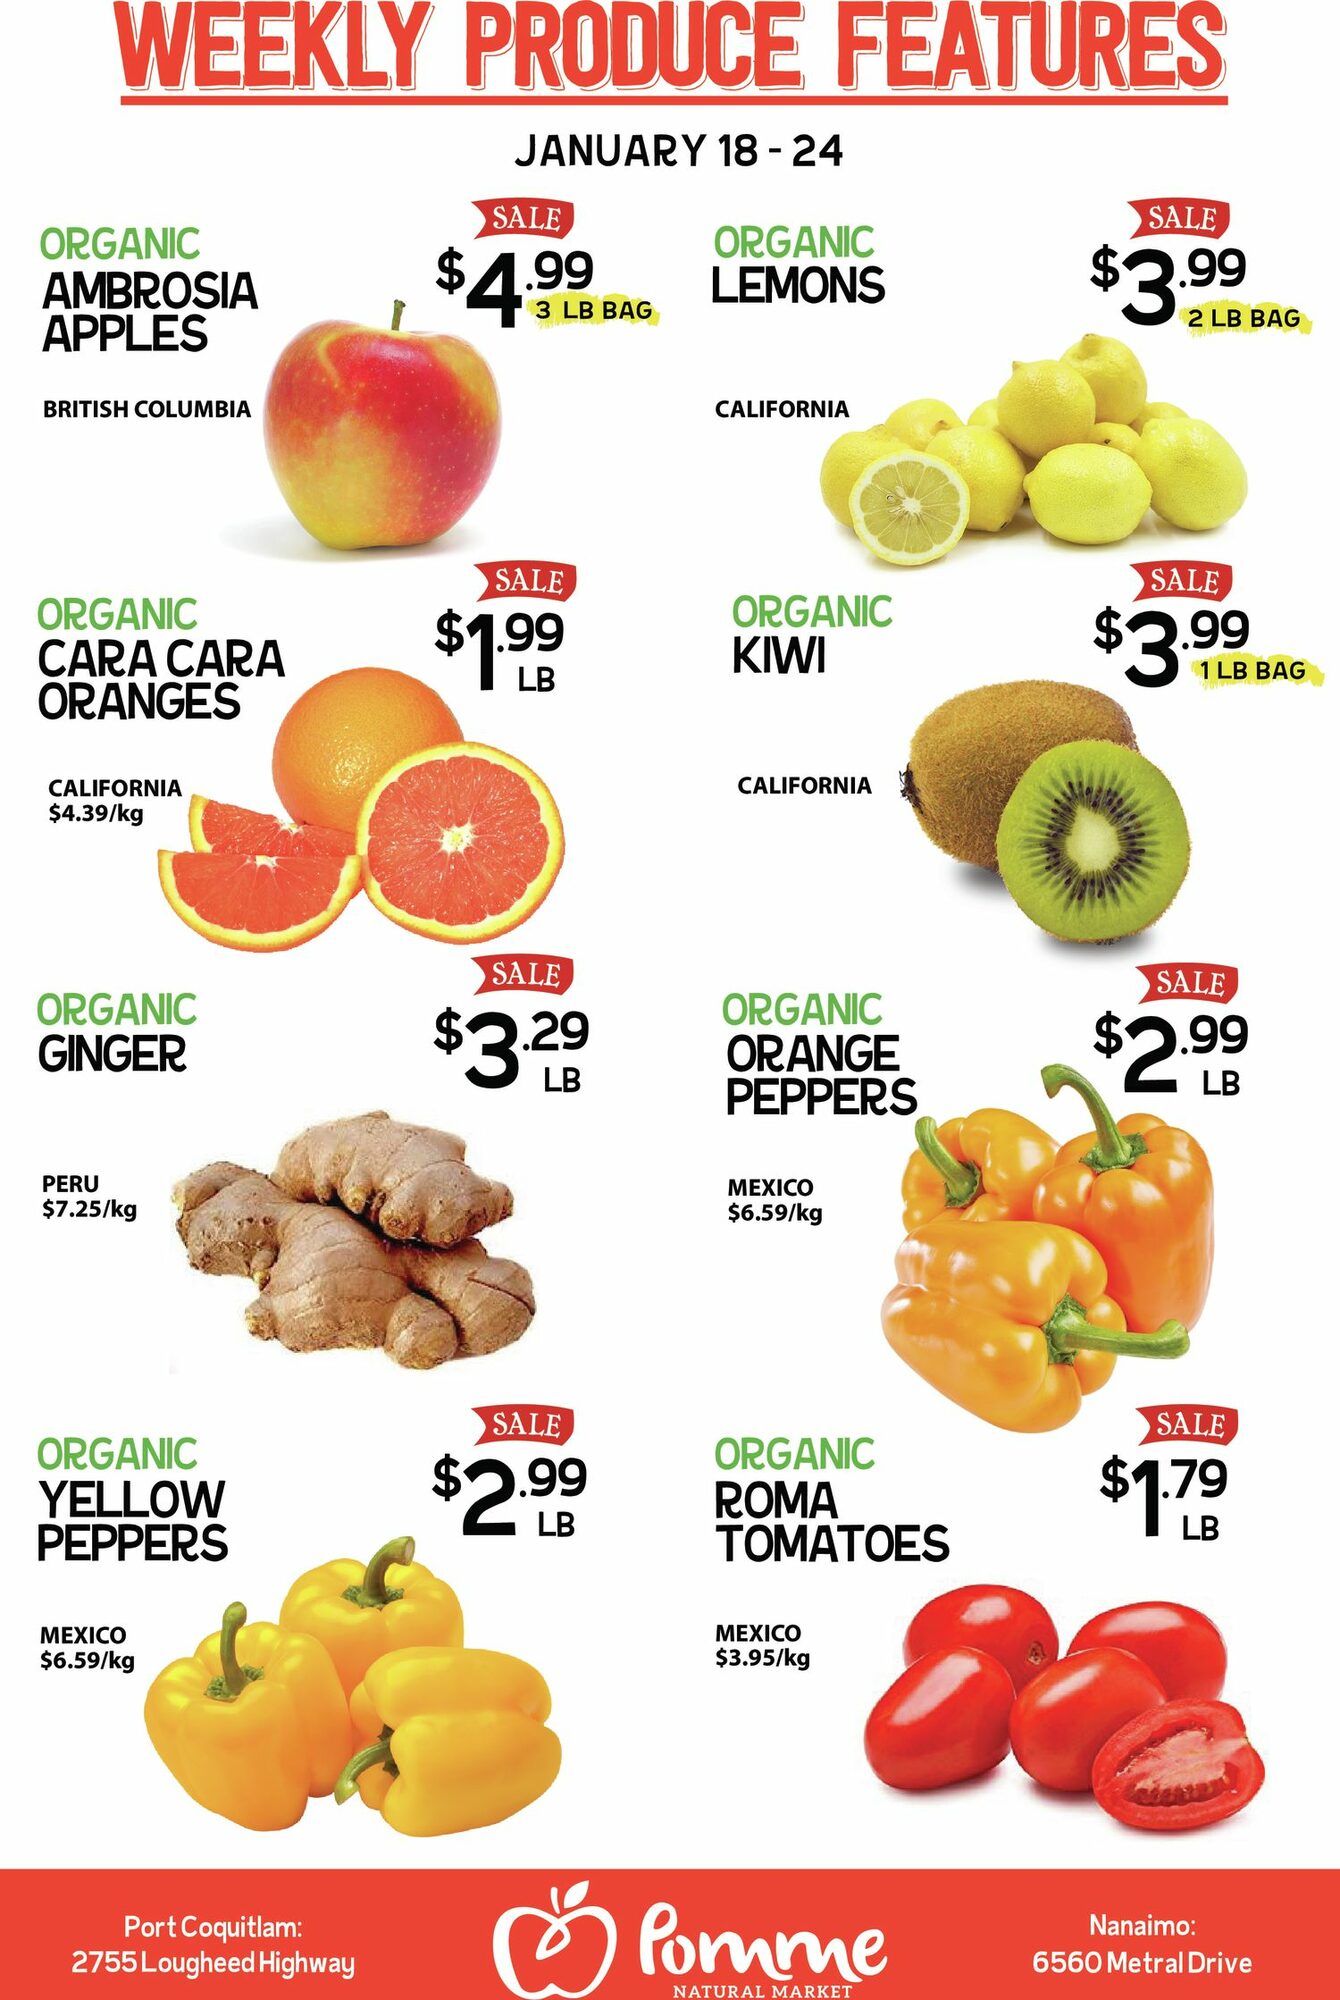 Pomme Natural Market - Weekly Flyer Specials